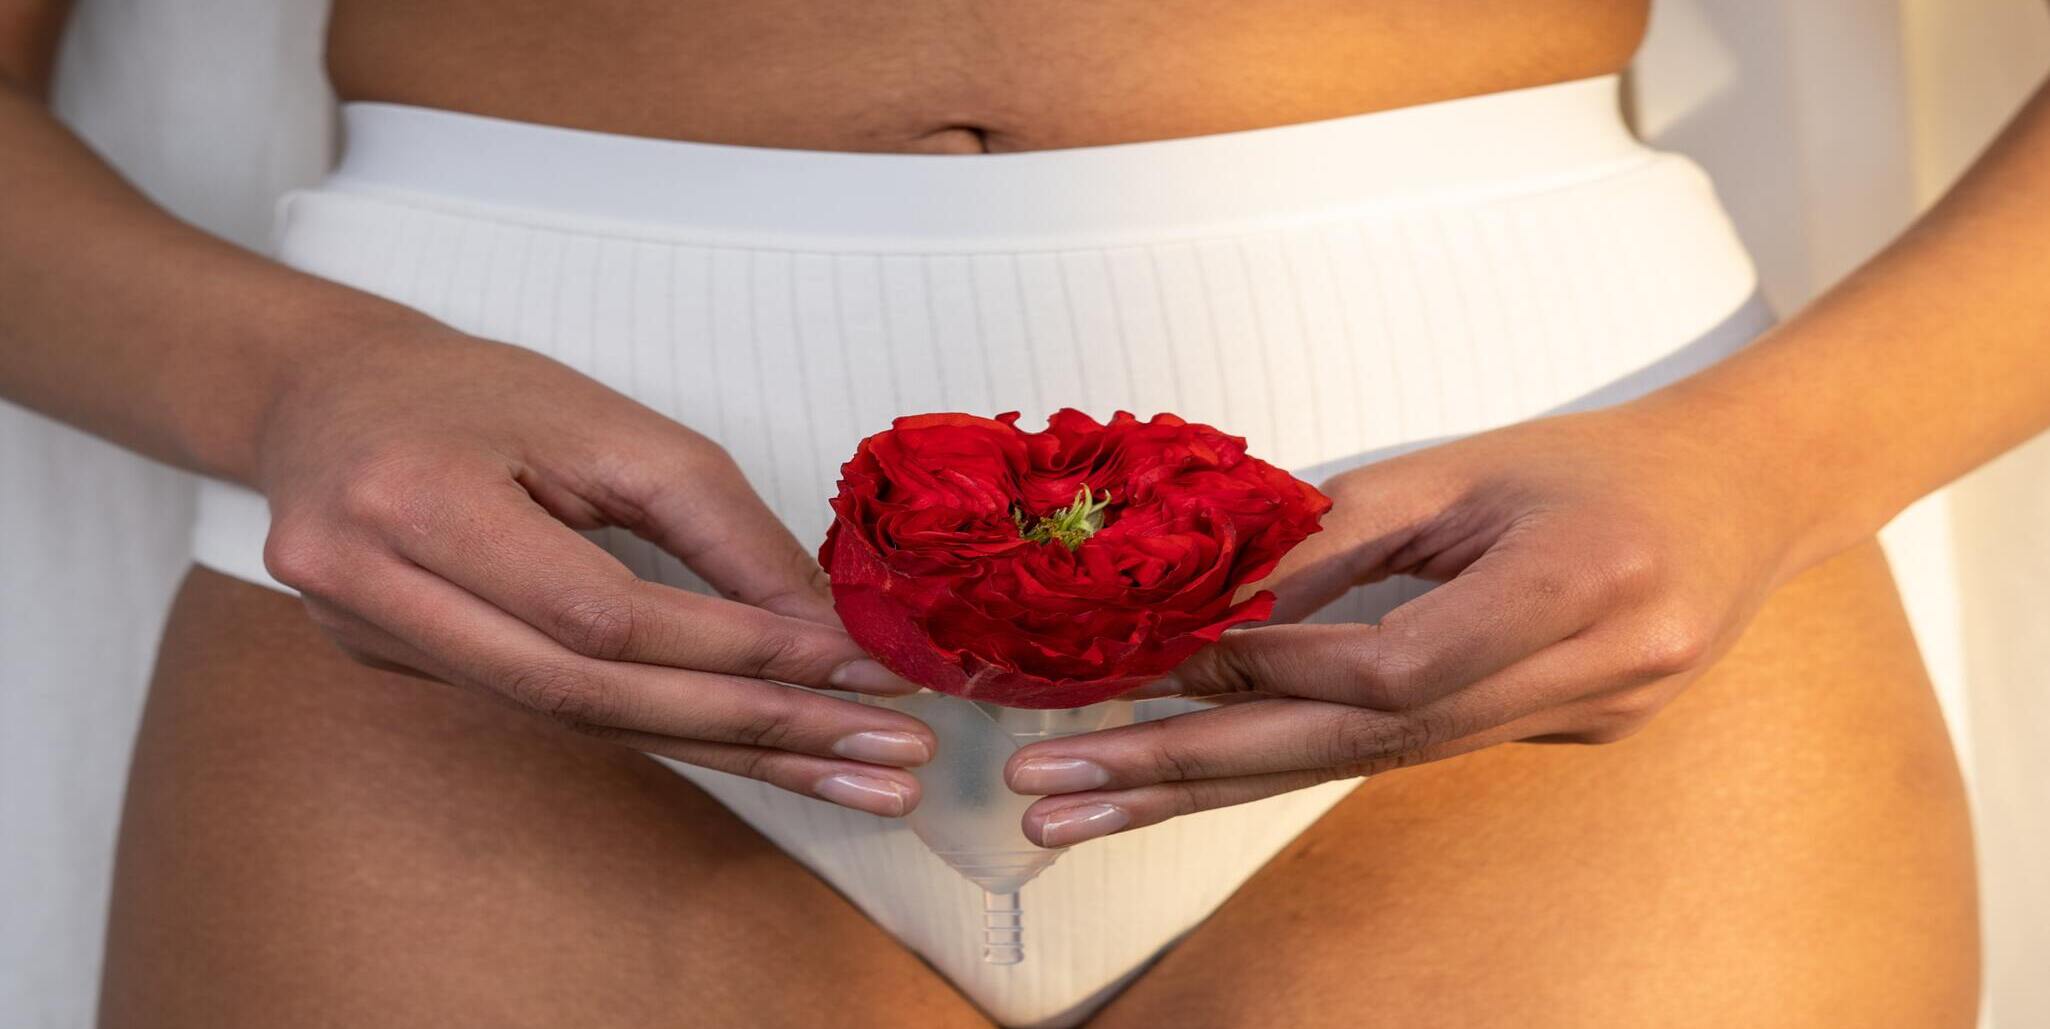 woman holding flower and period cup to symbolize fibroids